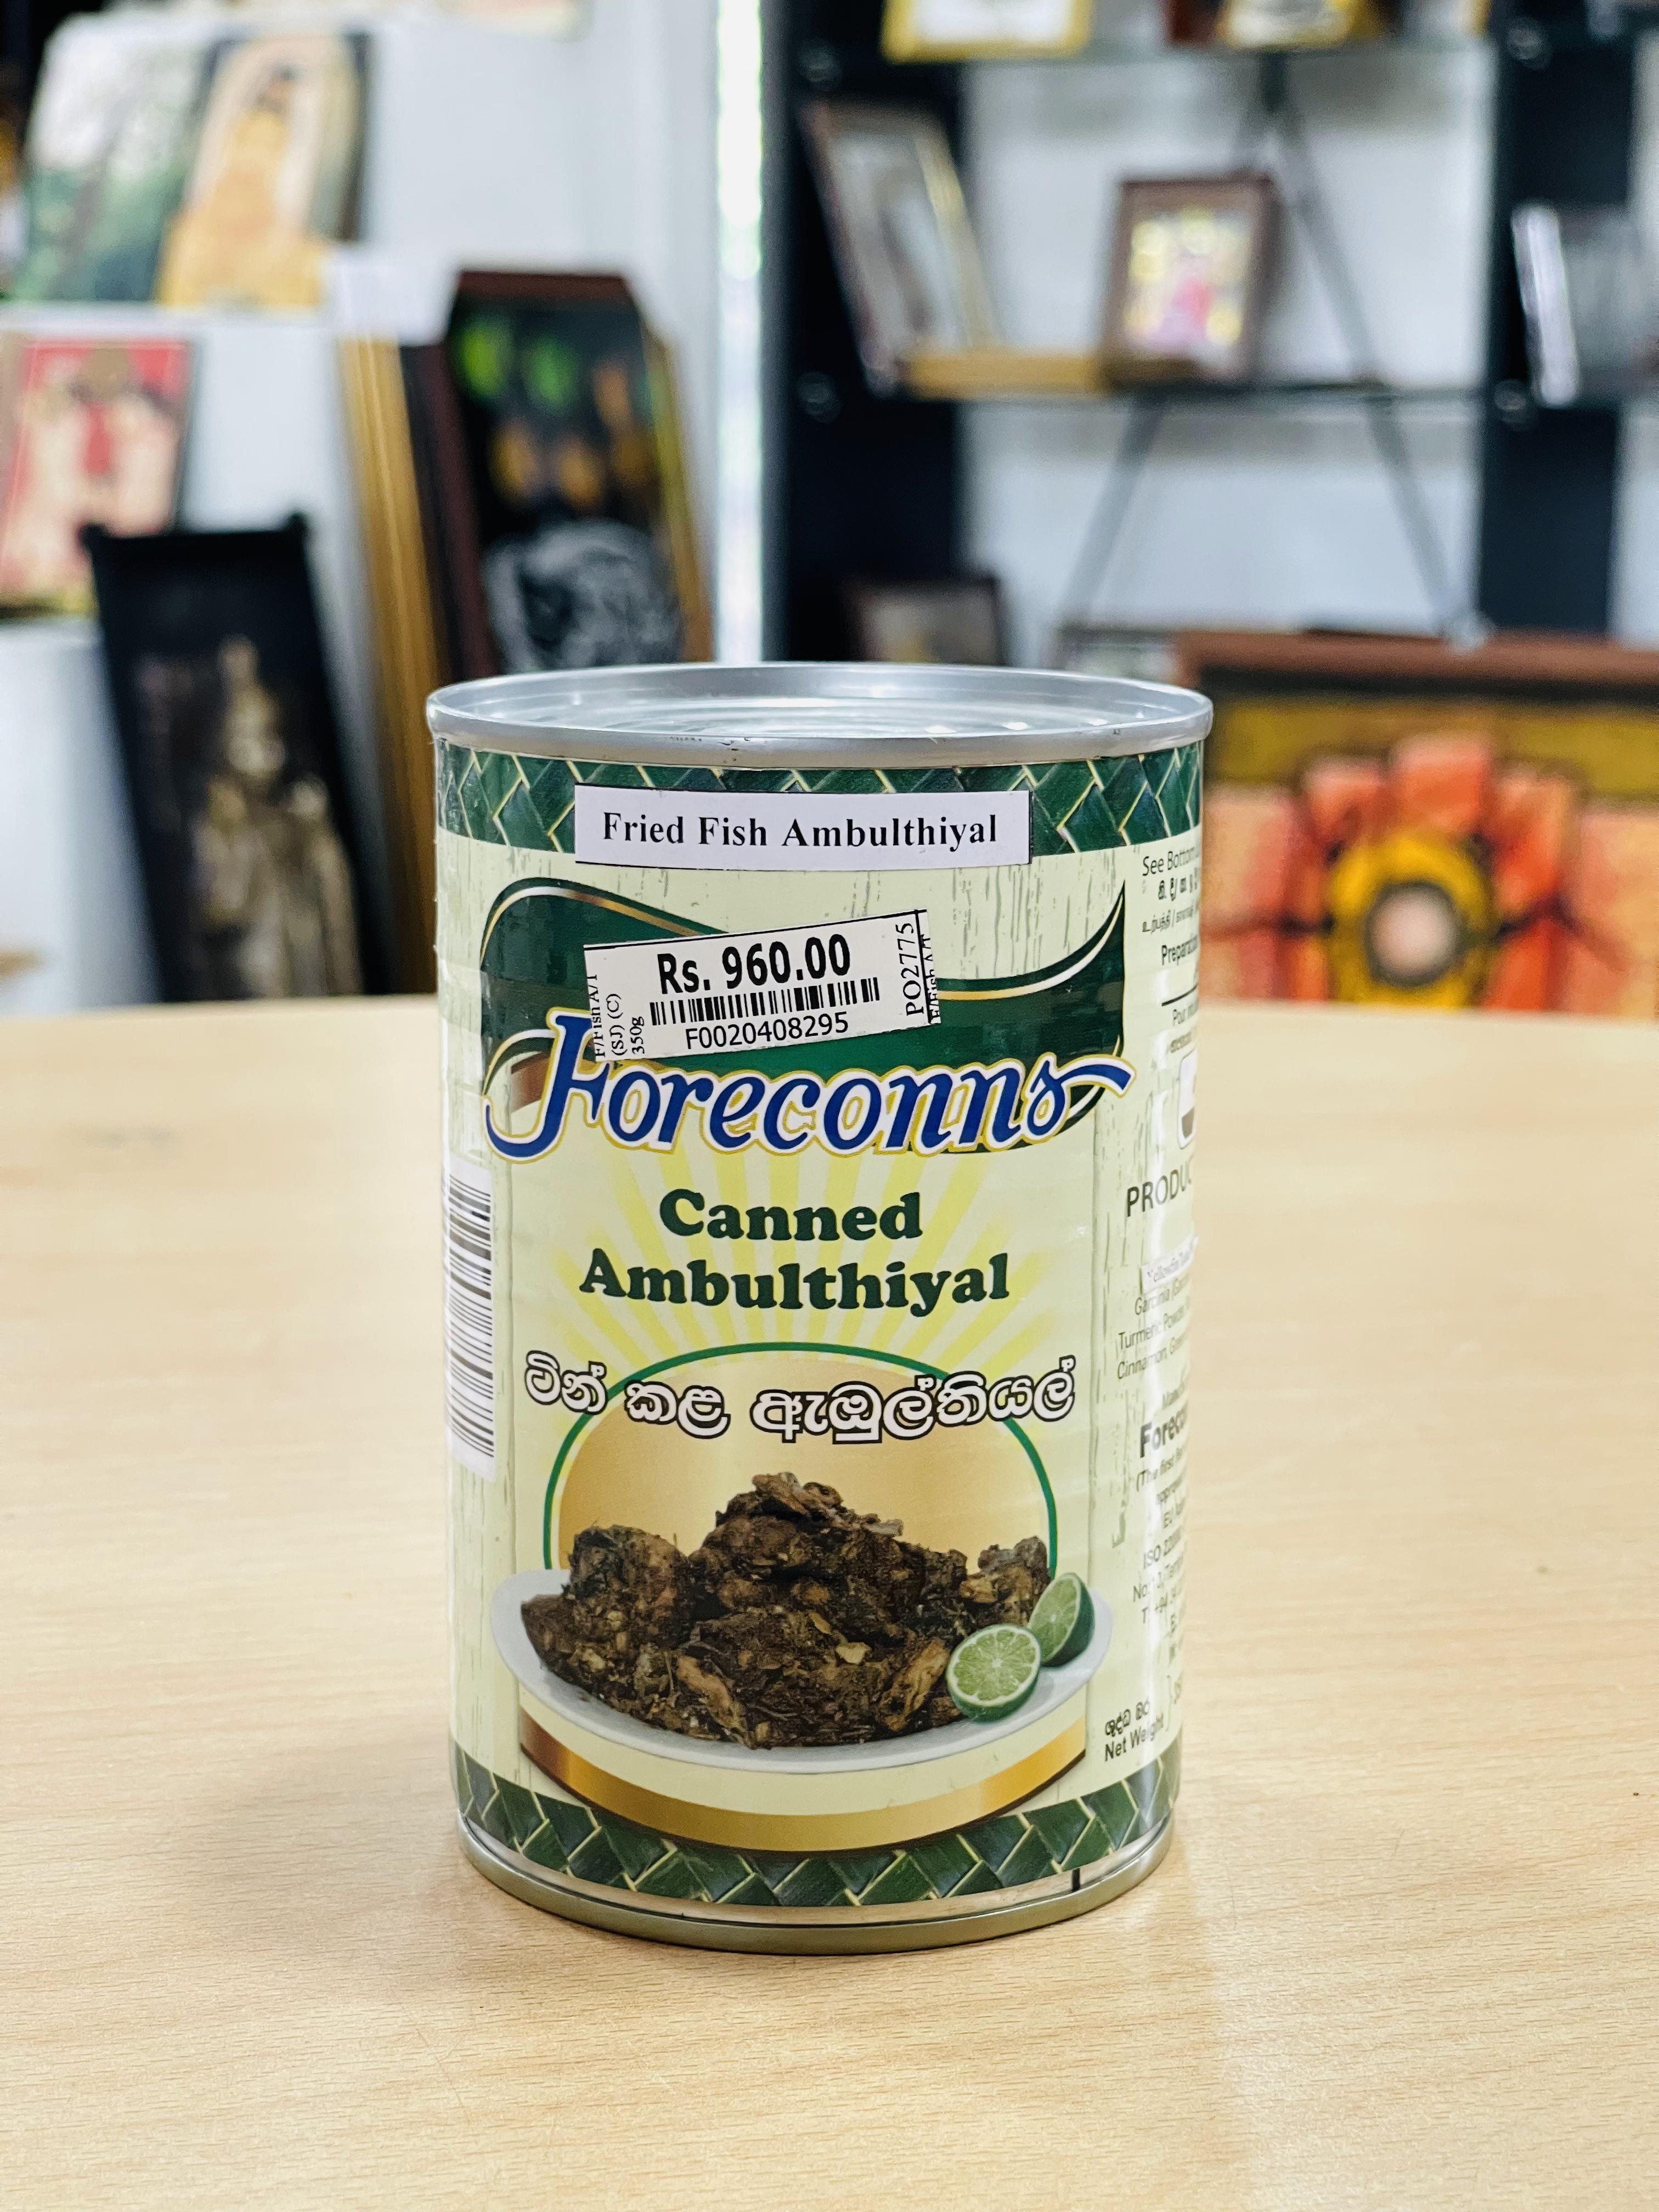 Foreconns Canned Ambulthiyal